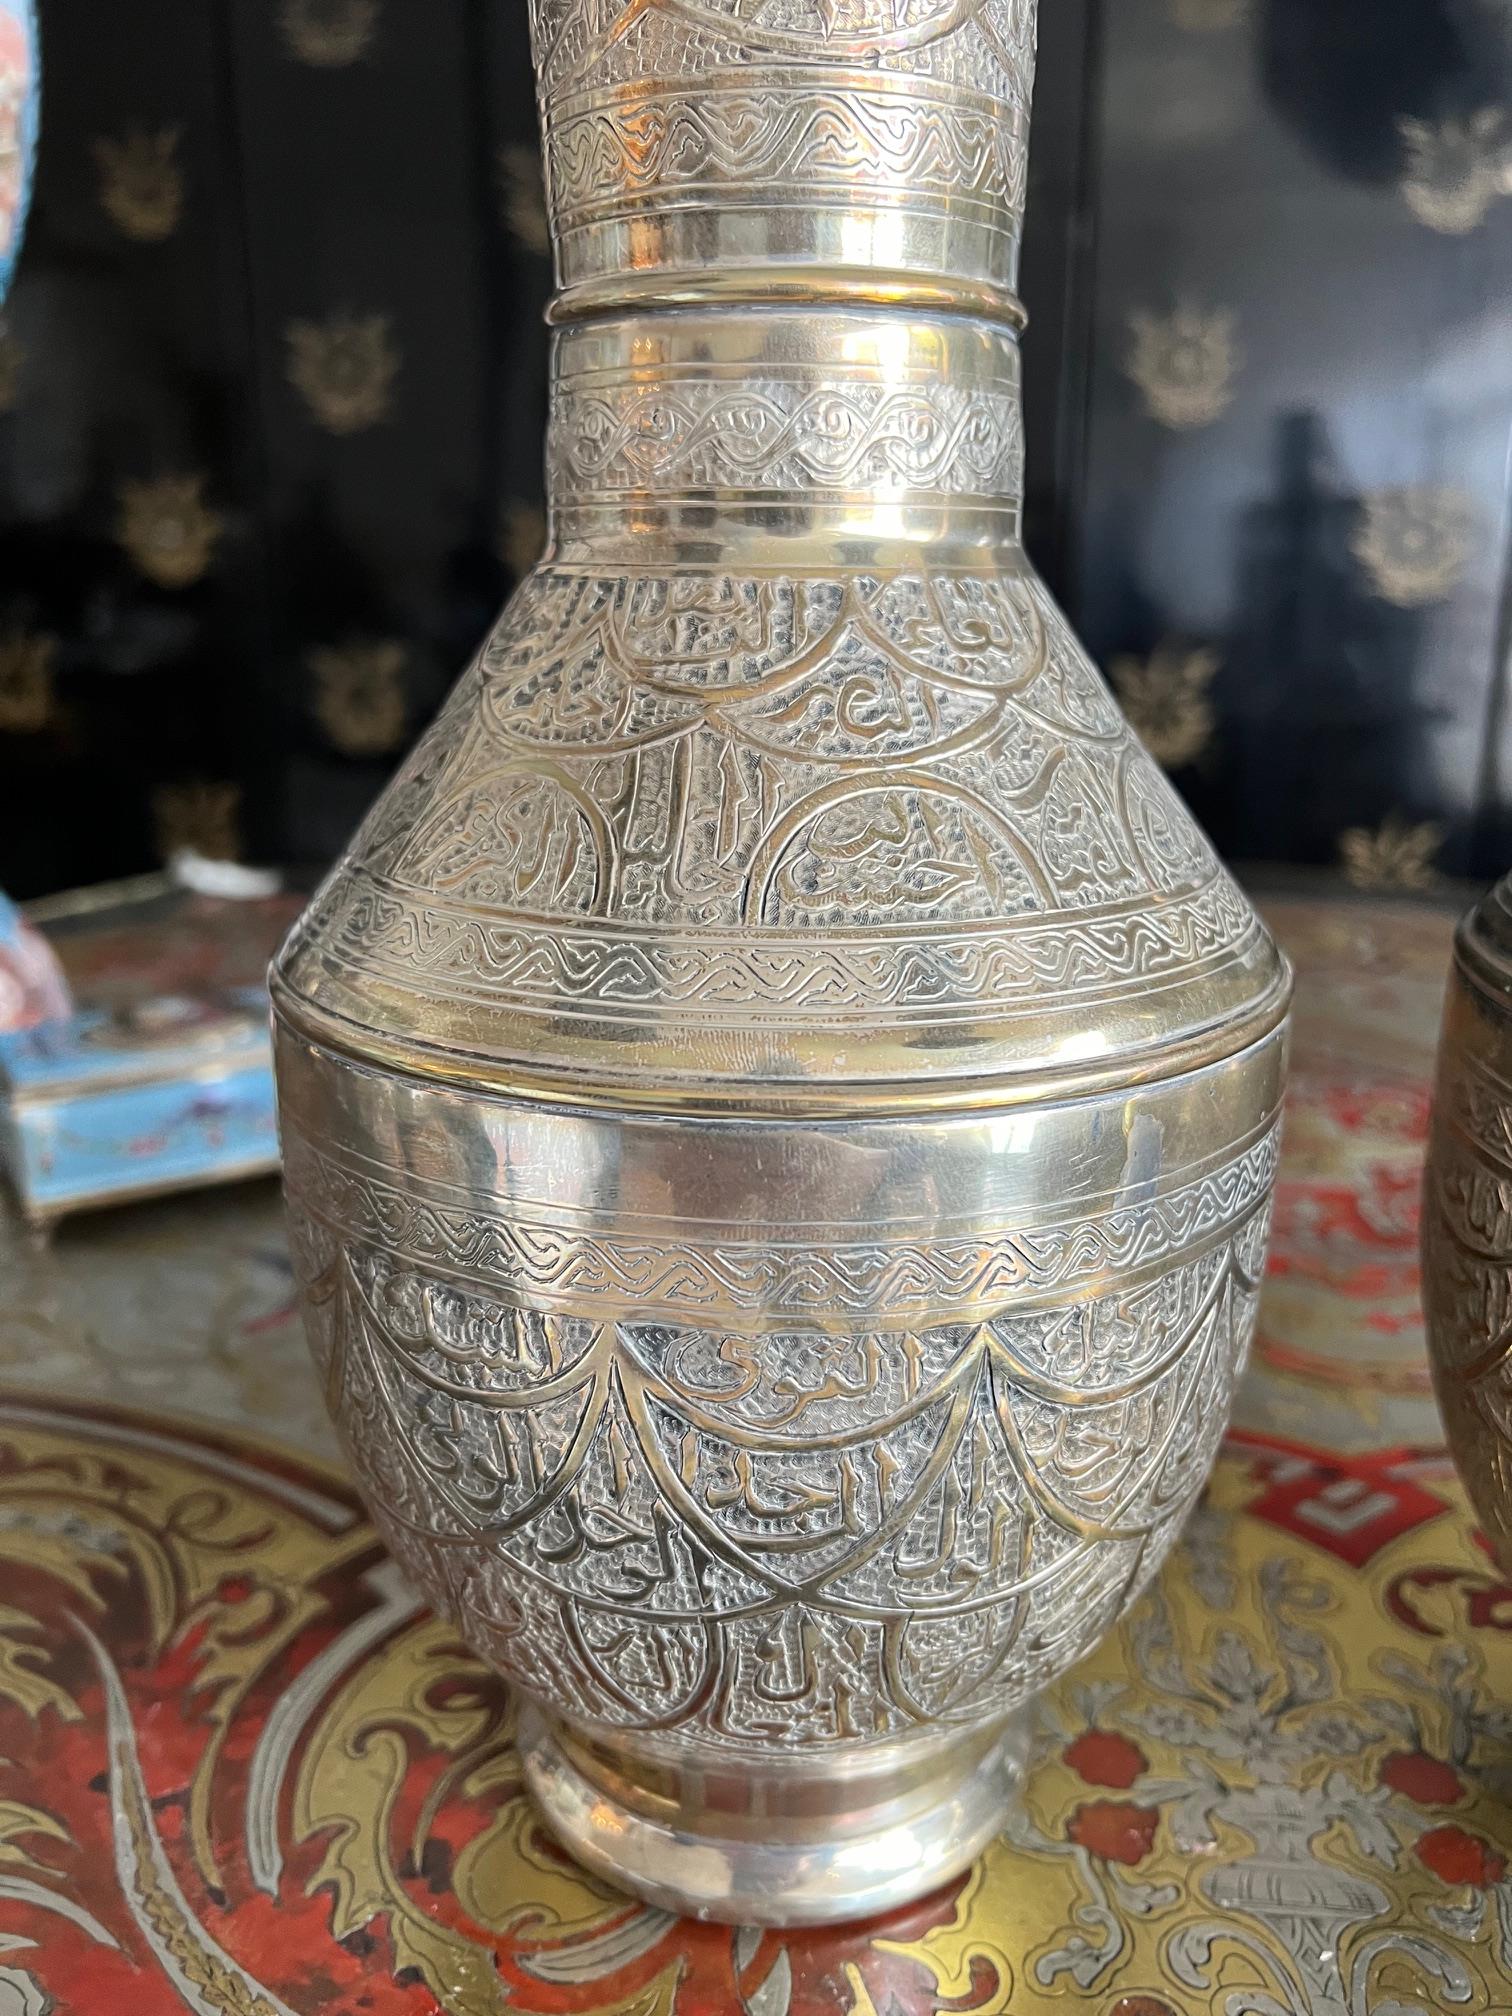 A PAIR OF SILVER ISLAMIC CALLIGRAPHIC VASES - Image 6 of 9